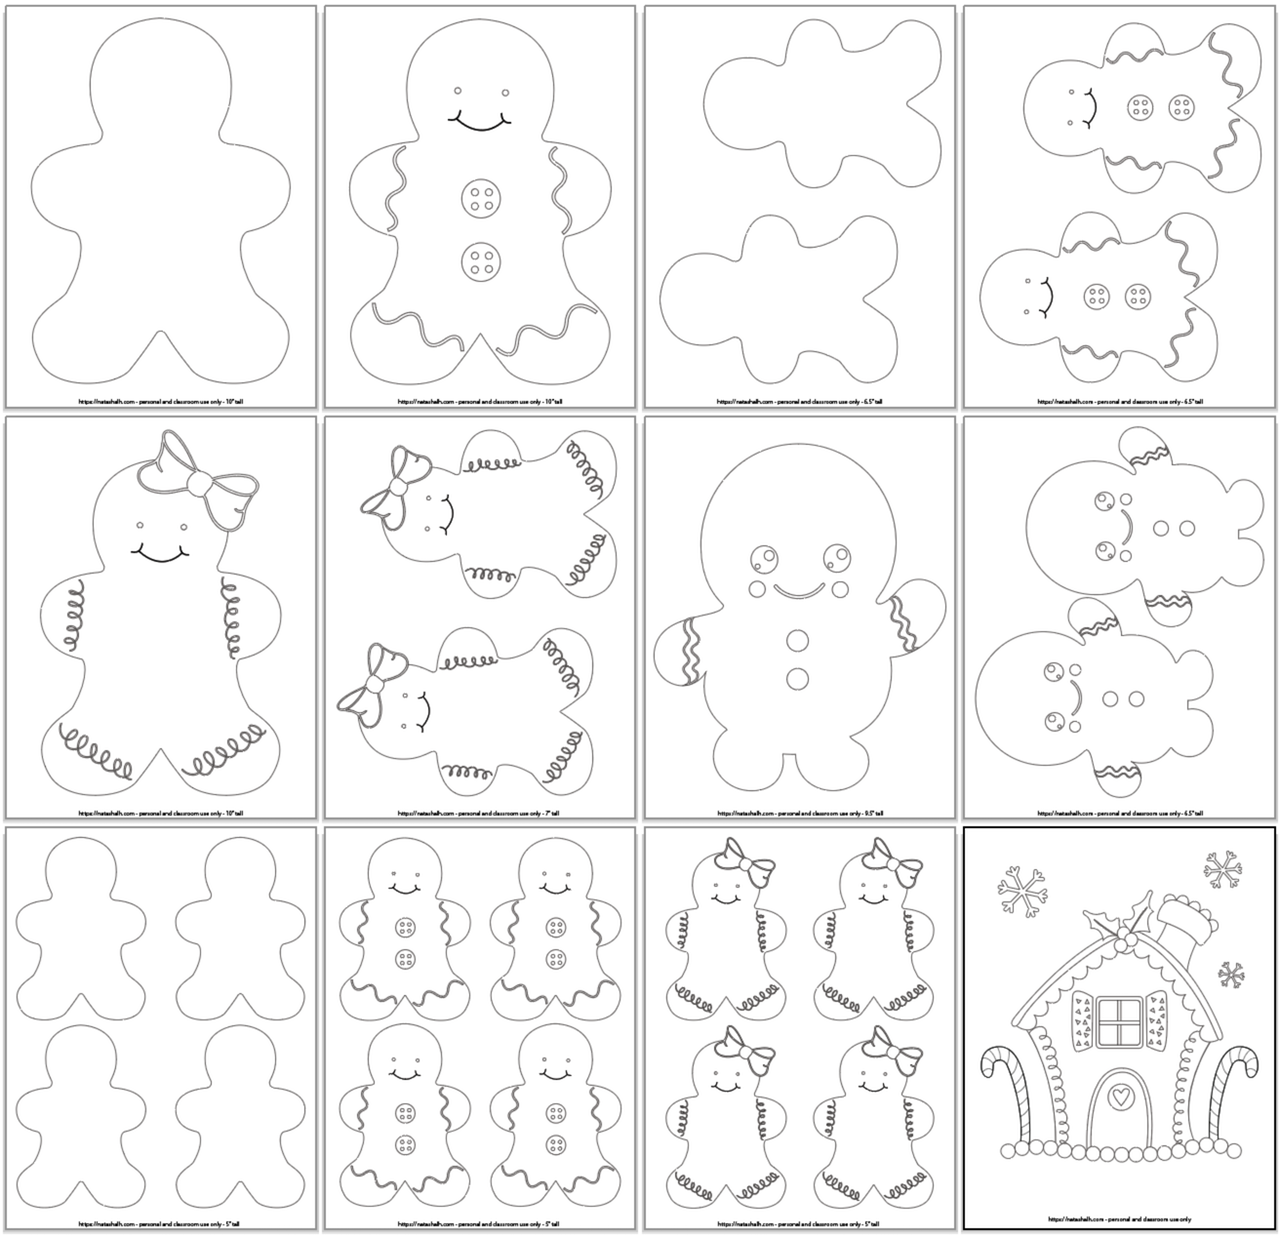 Gingerbread man templates coloring pages â the artisan life